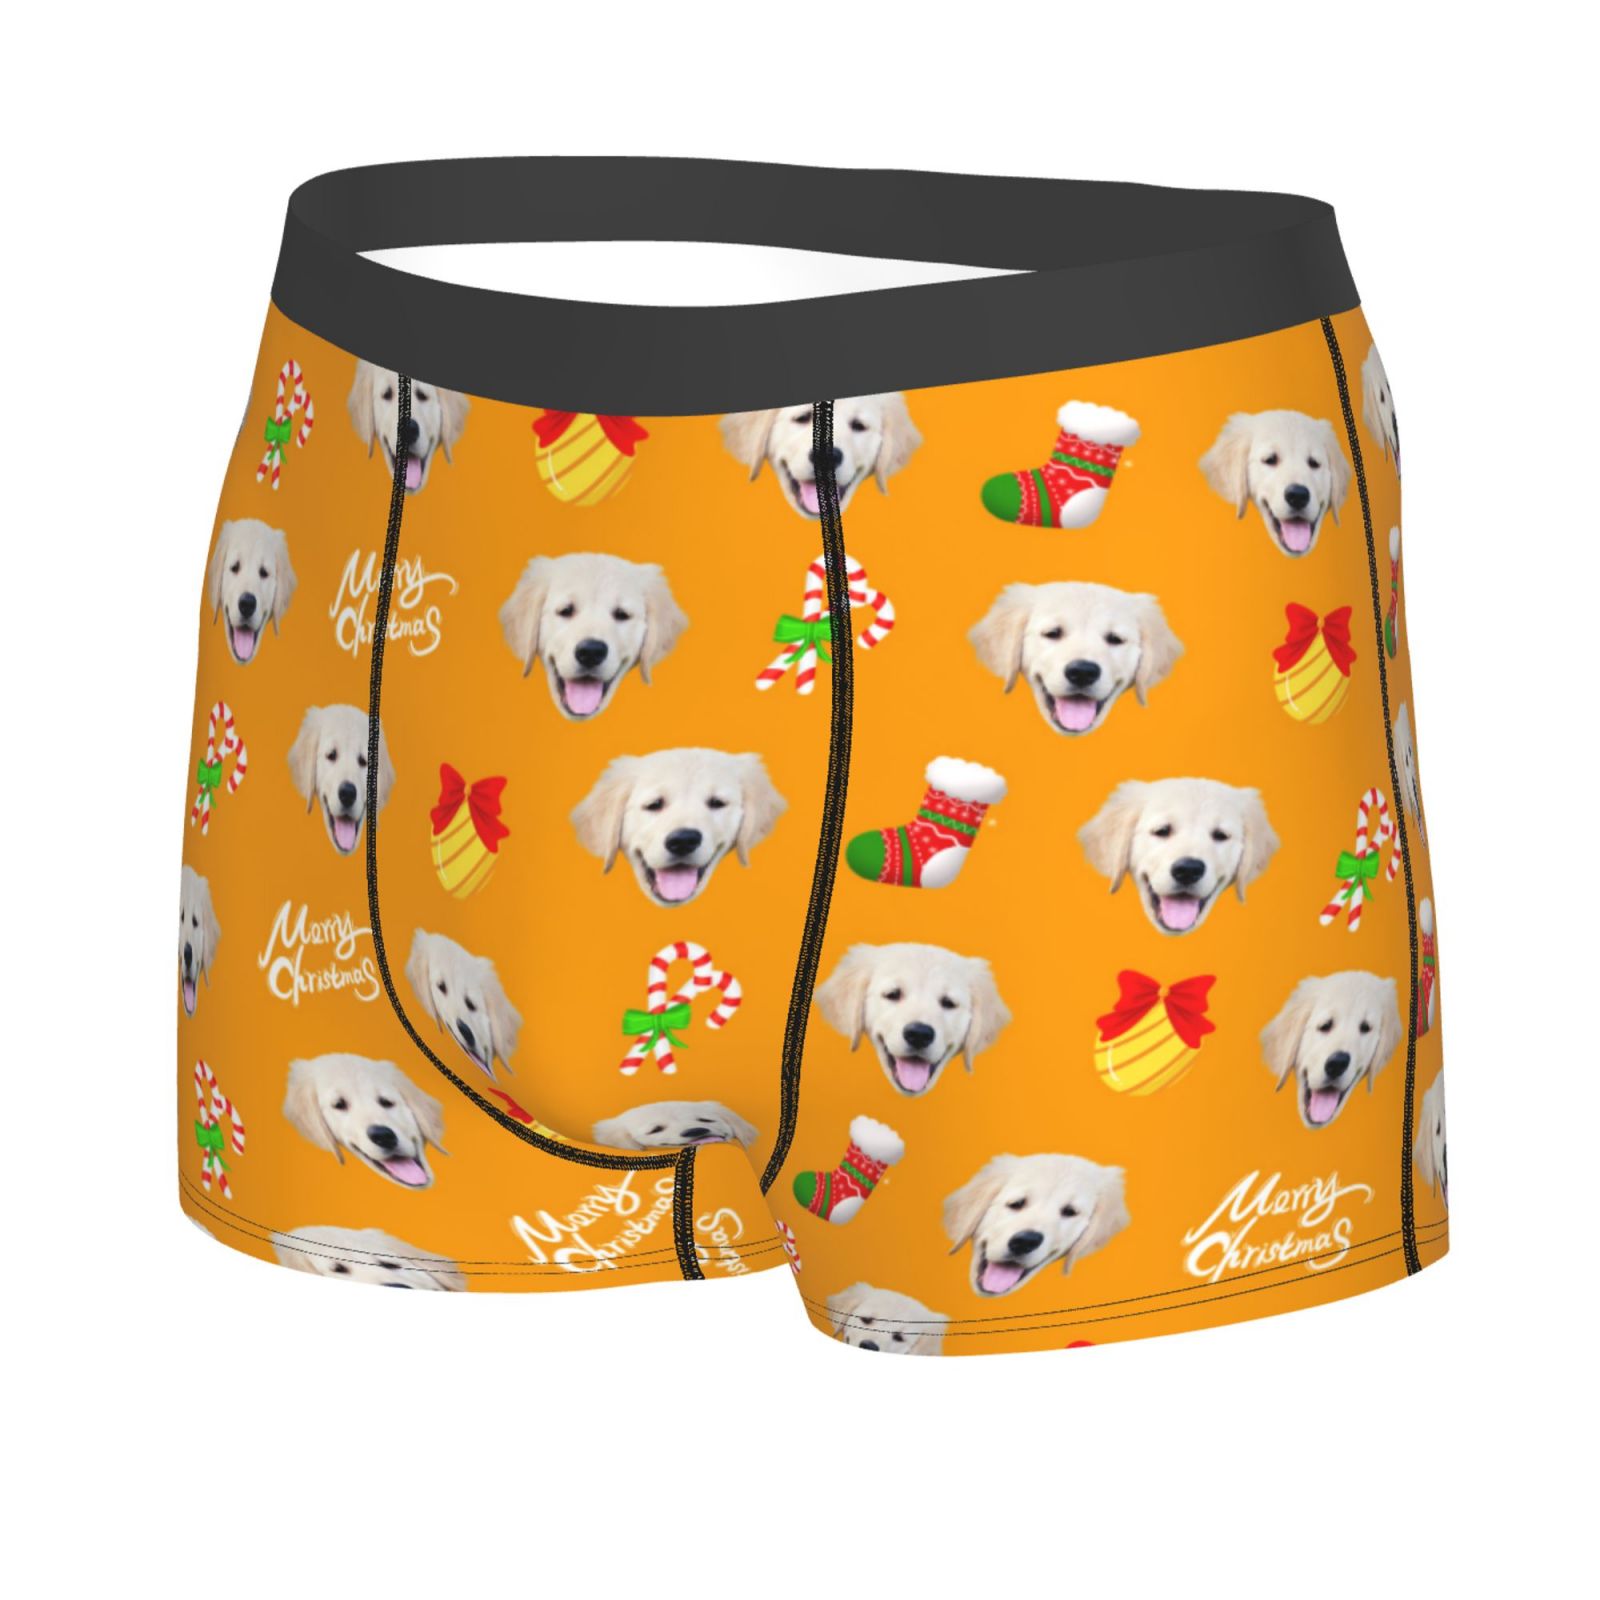 Custom Face Boxers Personalized Face Underwear Christmas Gift